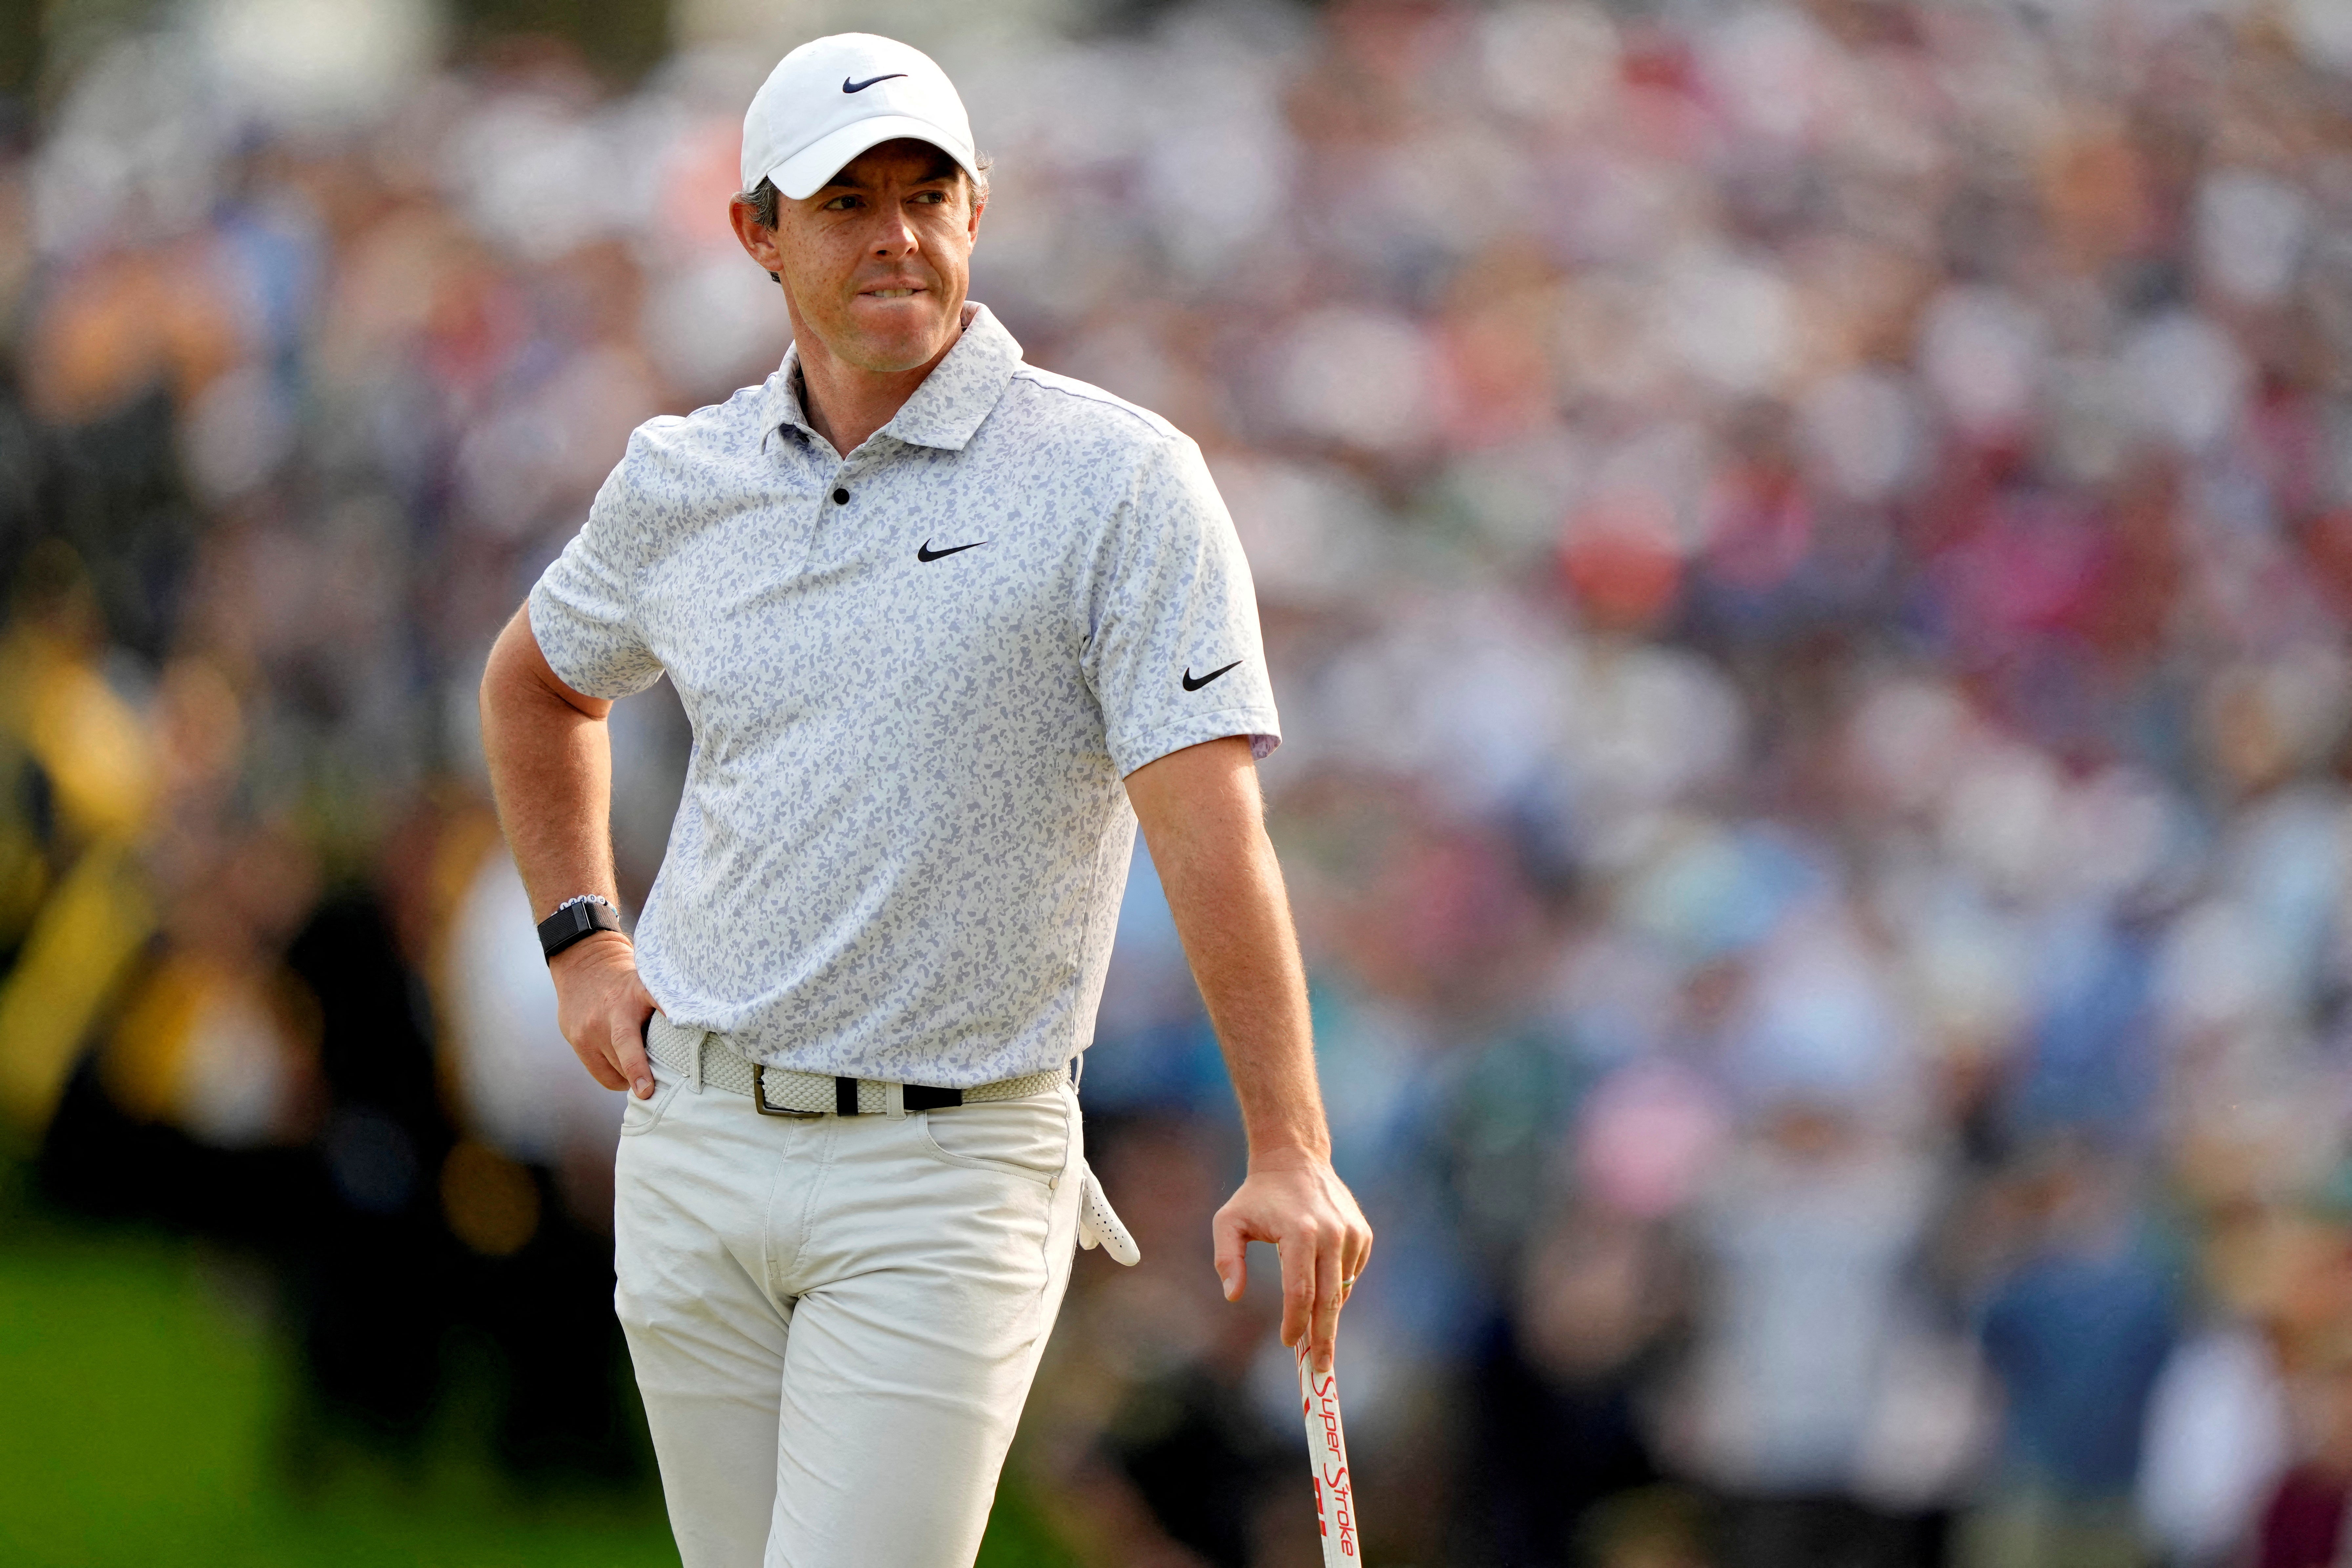 Rory McIlroy has been an outspoken critic of LIV Golf